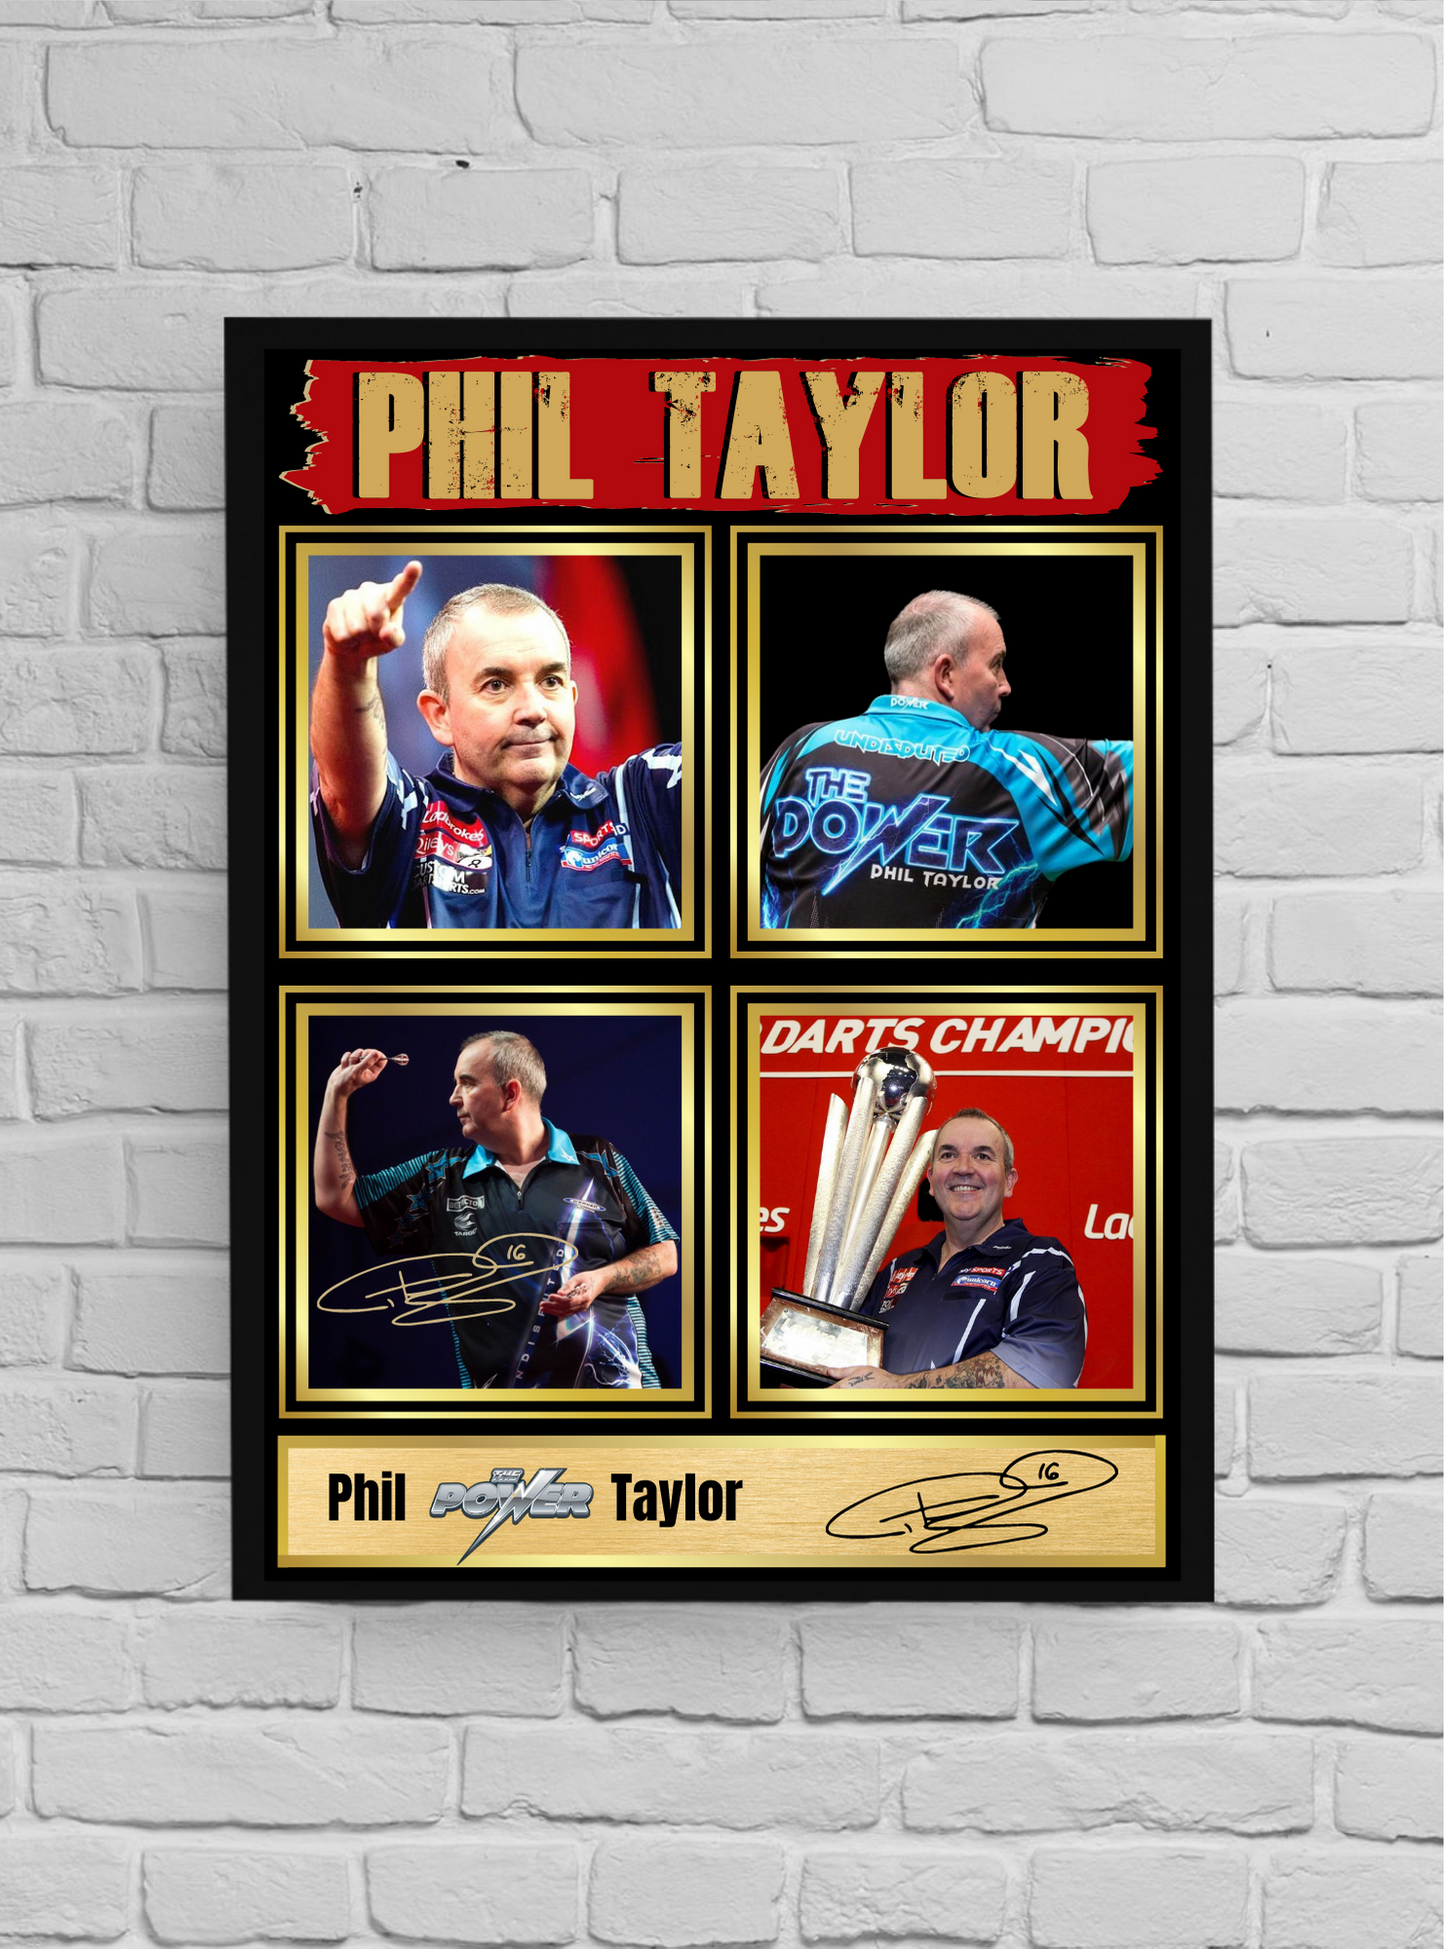 Phil 'The Power' Taylor (Darts) #8 - Memorabilia/Collectible/print signed